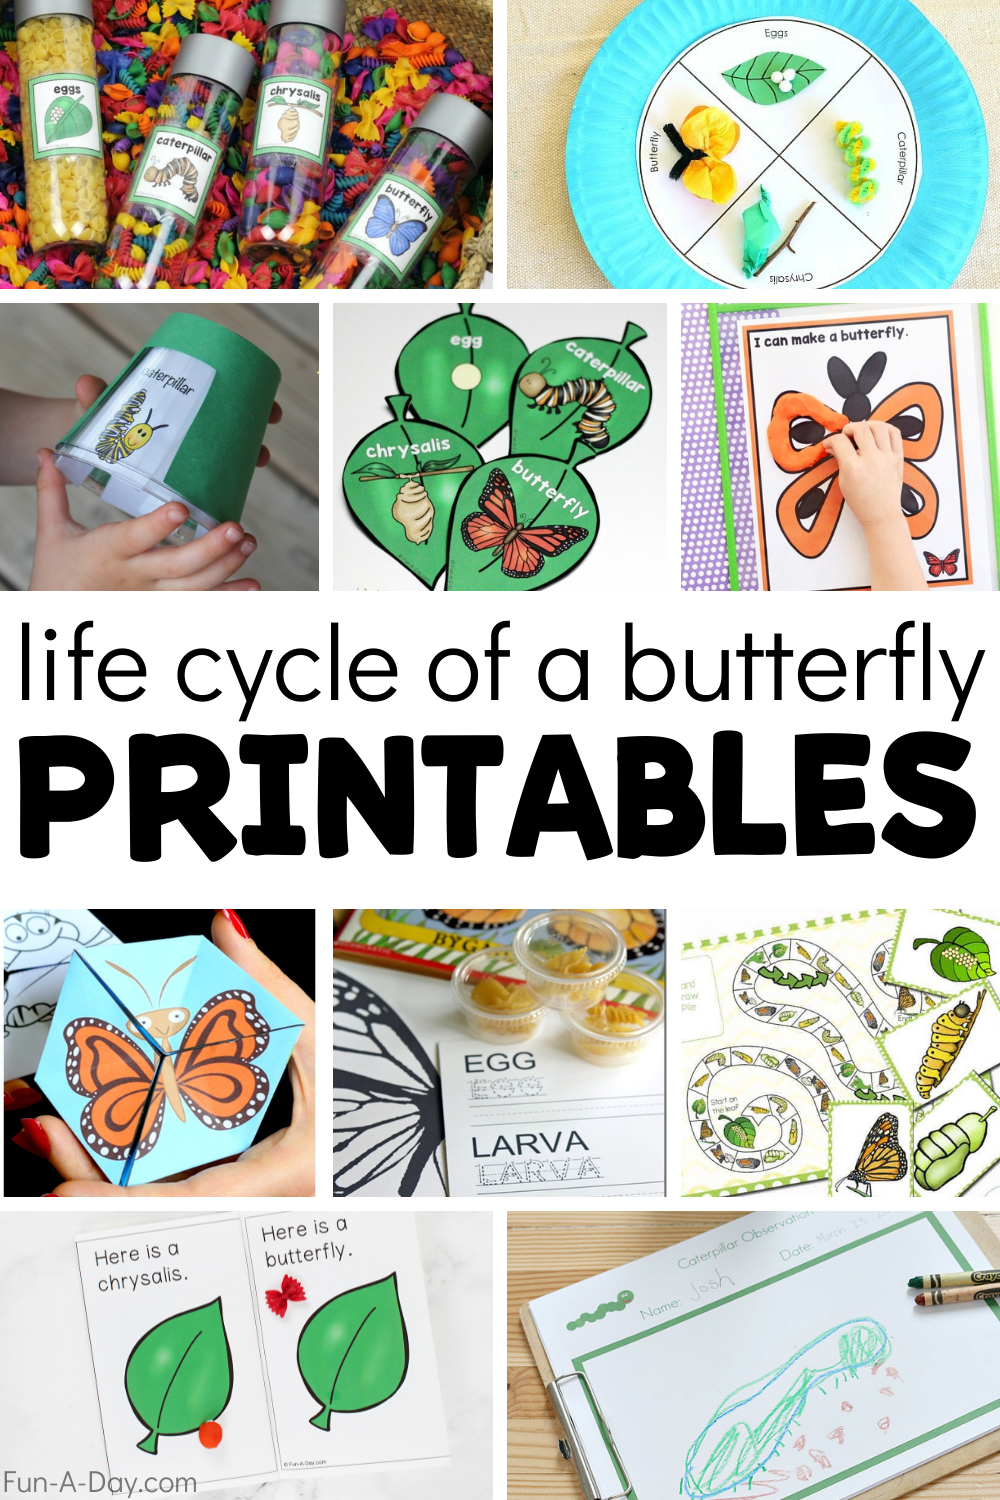 15 Free Life Cycle of a Butterfly Printables